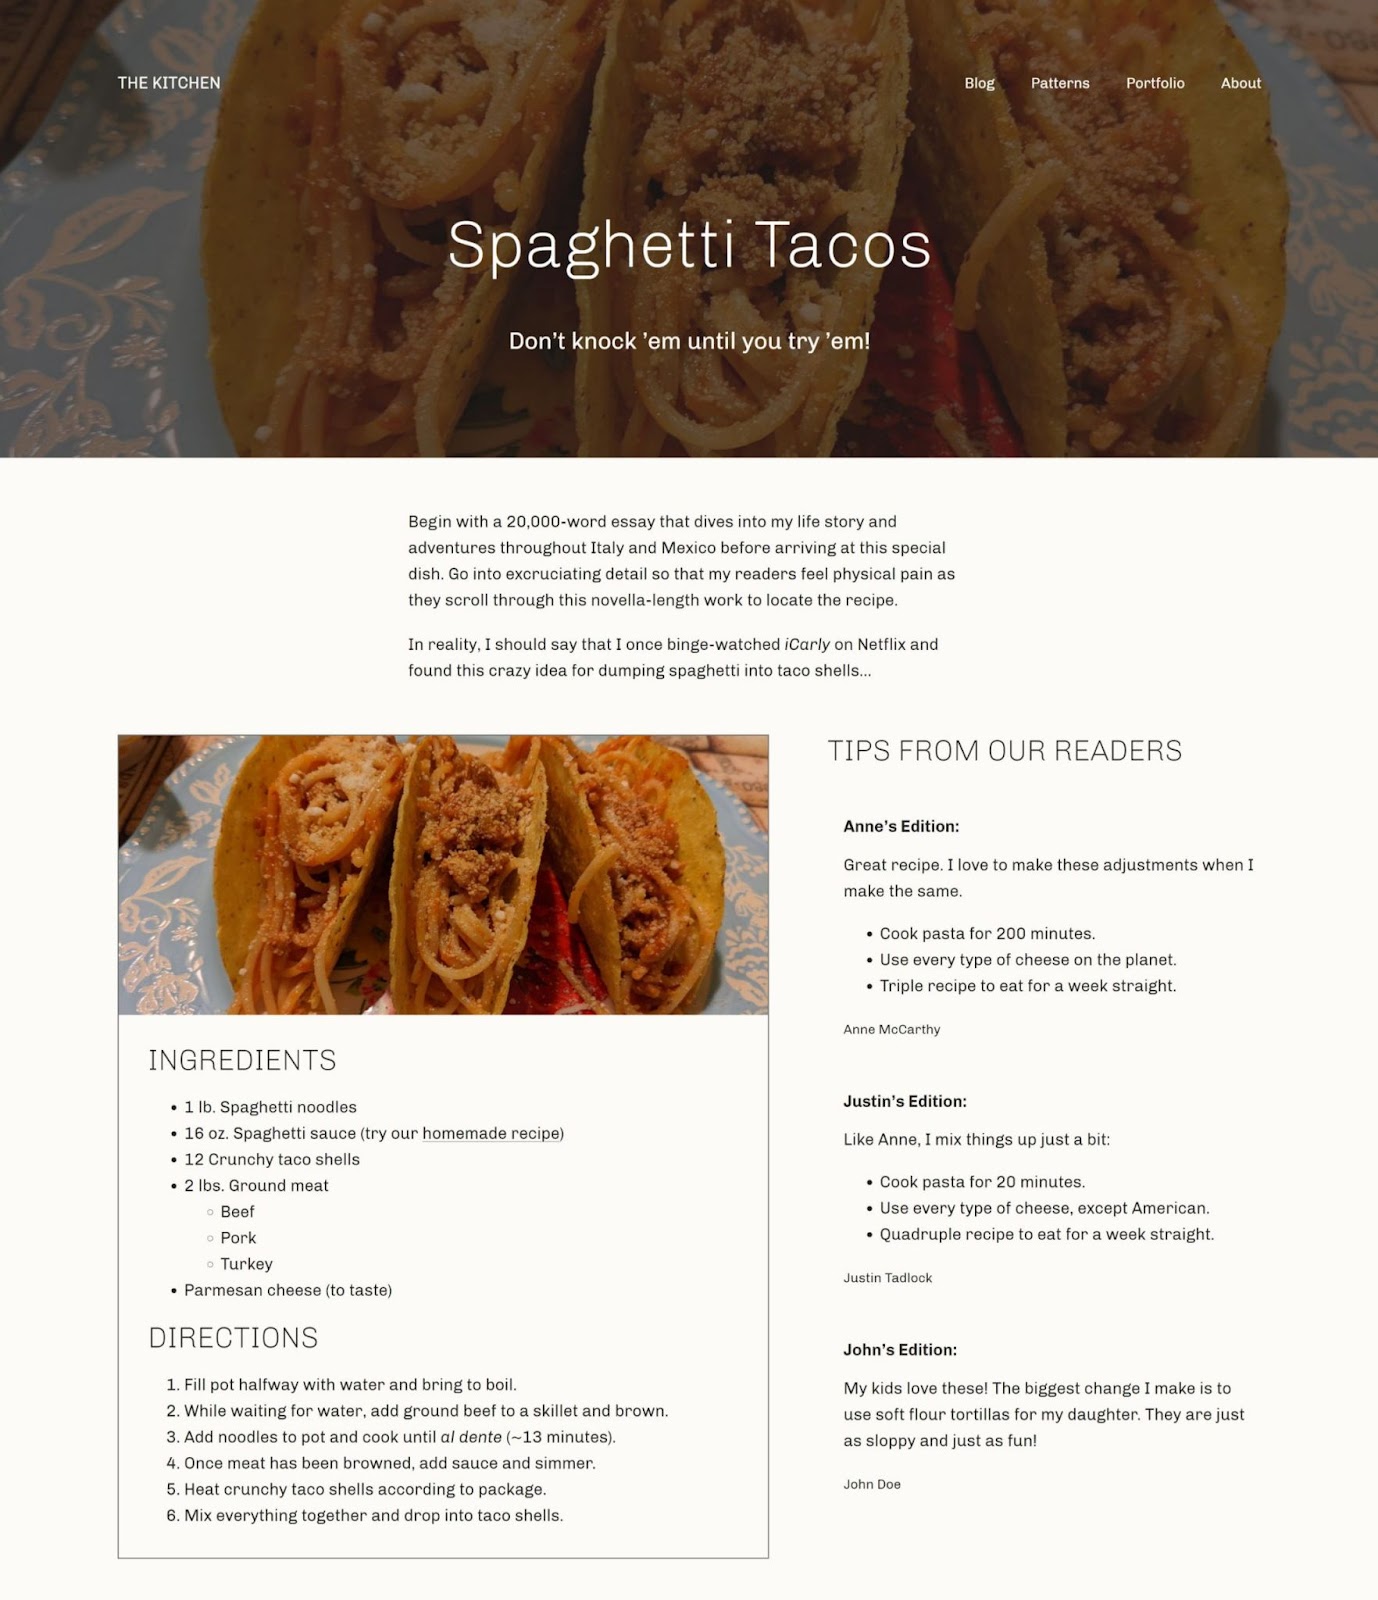 Page showing a simple recipe on spaghetti tacos with tips from readers.